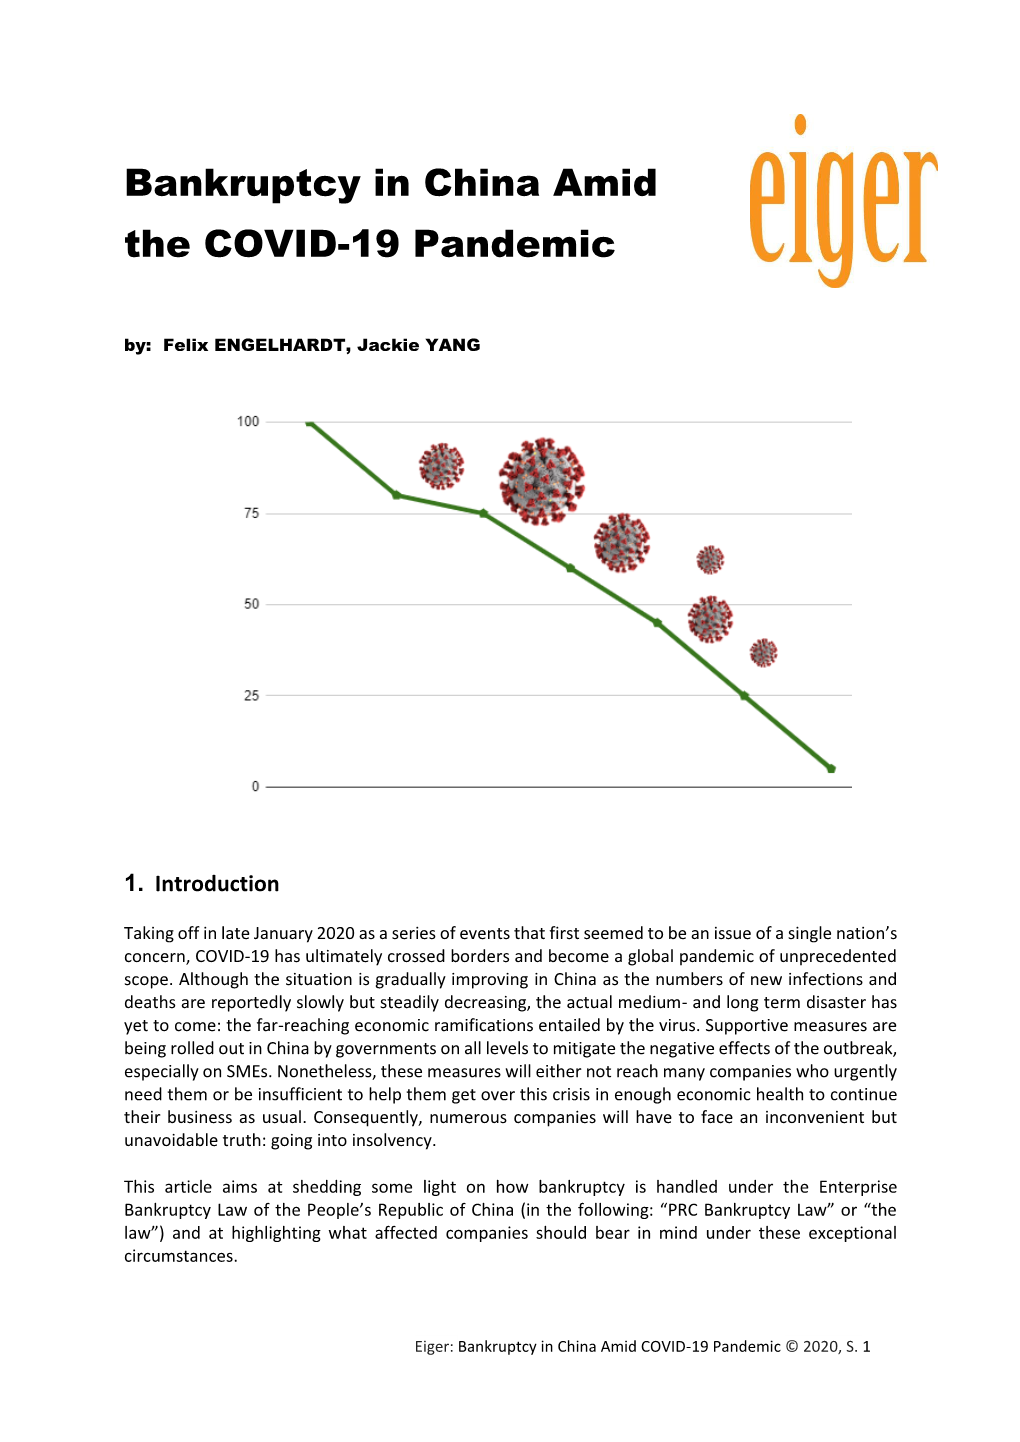 Bankruptcy in China Amid the COVID-19 Pandemic By: Felix ENGELHARDT, Jackie YANG